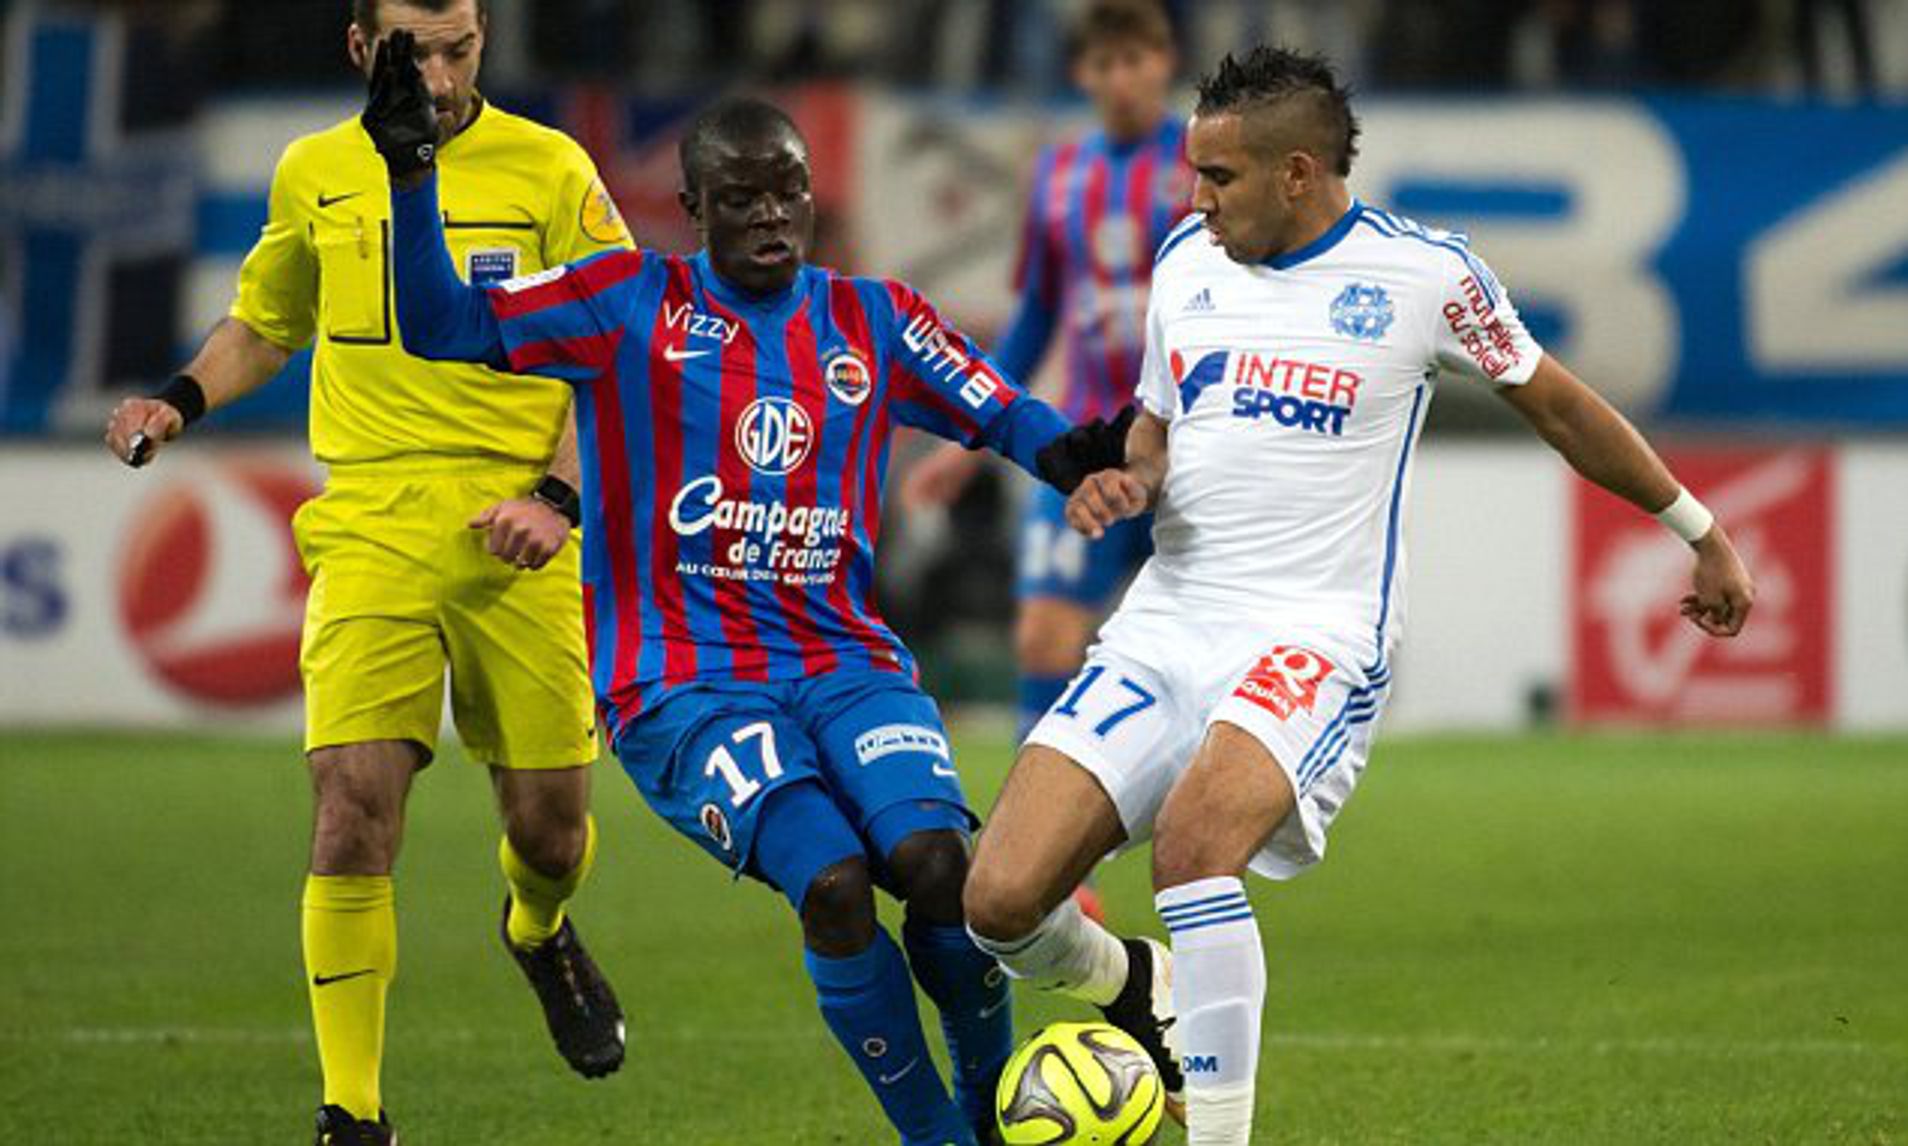 N'Golo Kante was a Caen player back in 2015. 